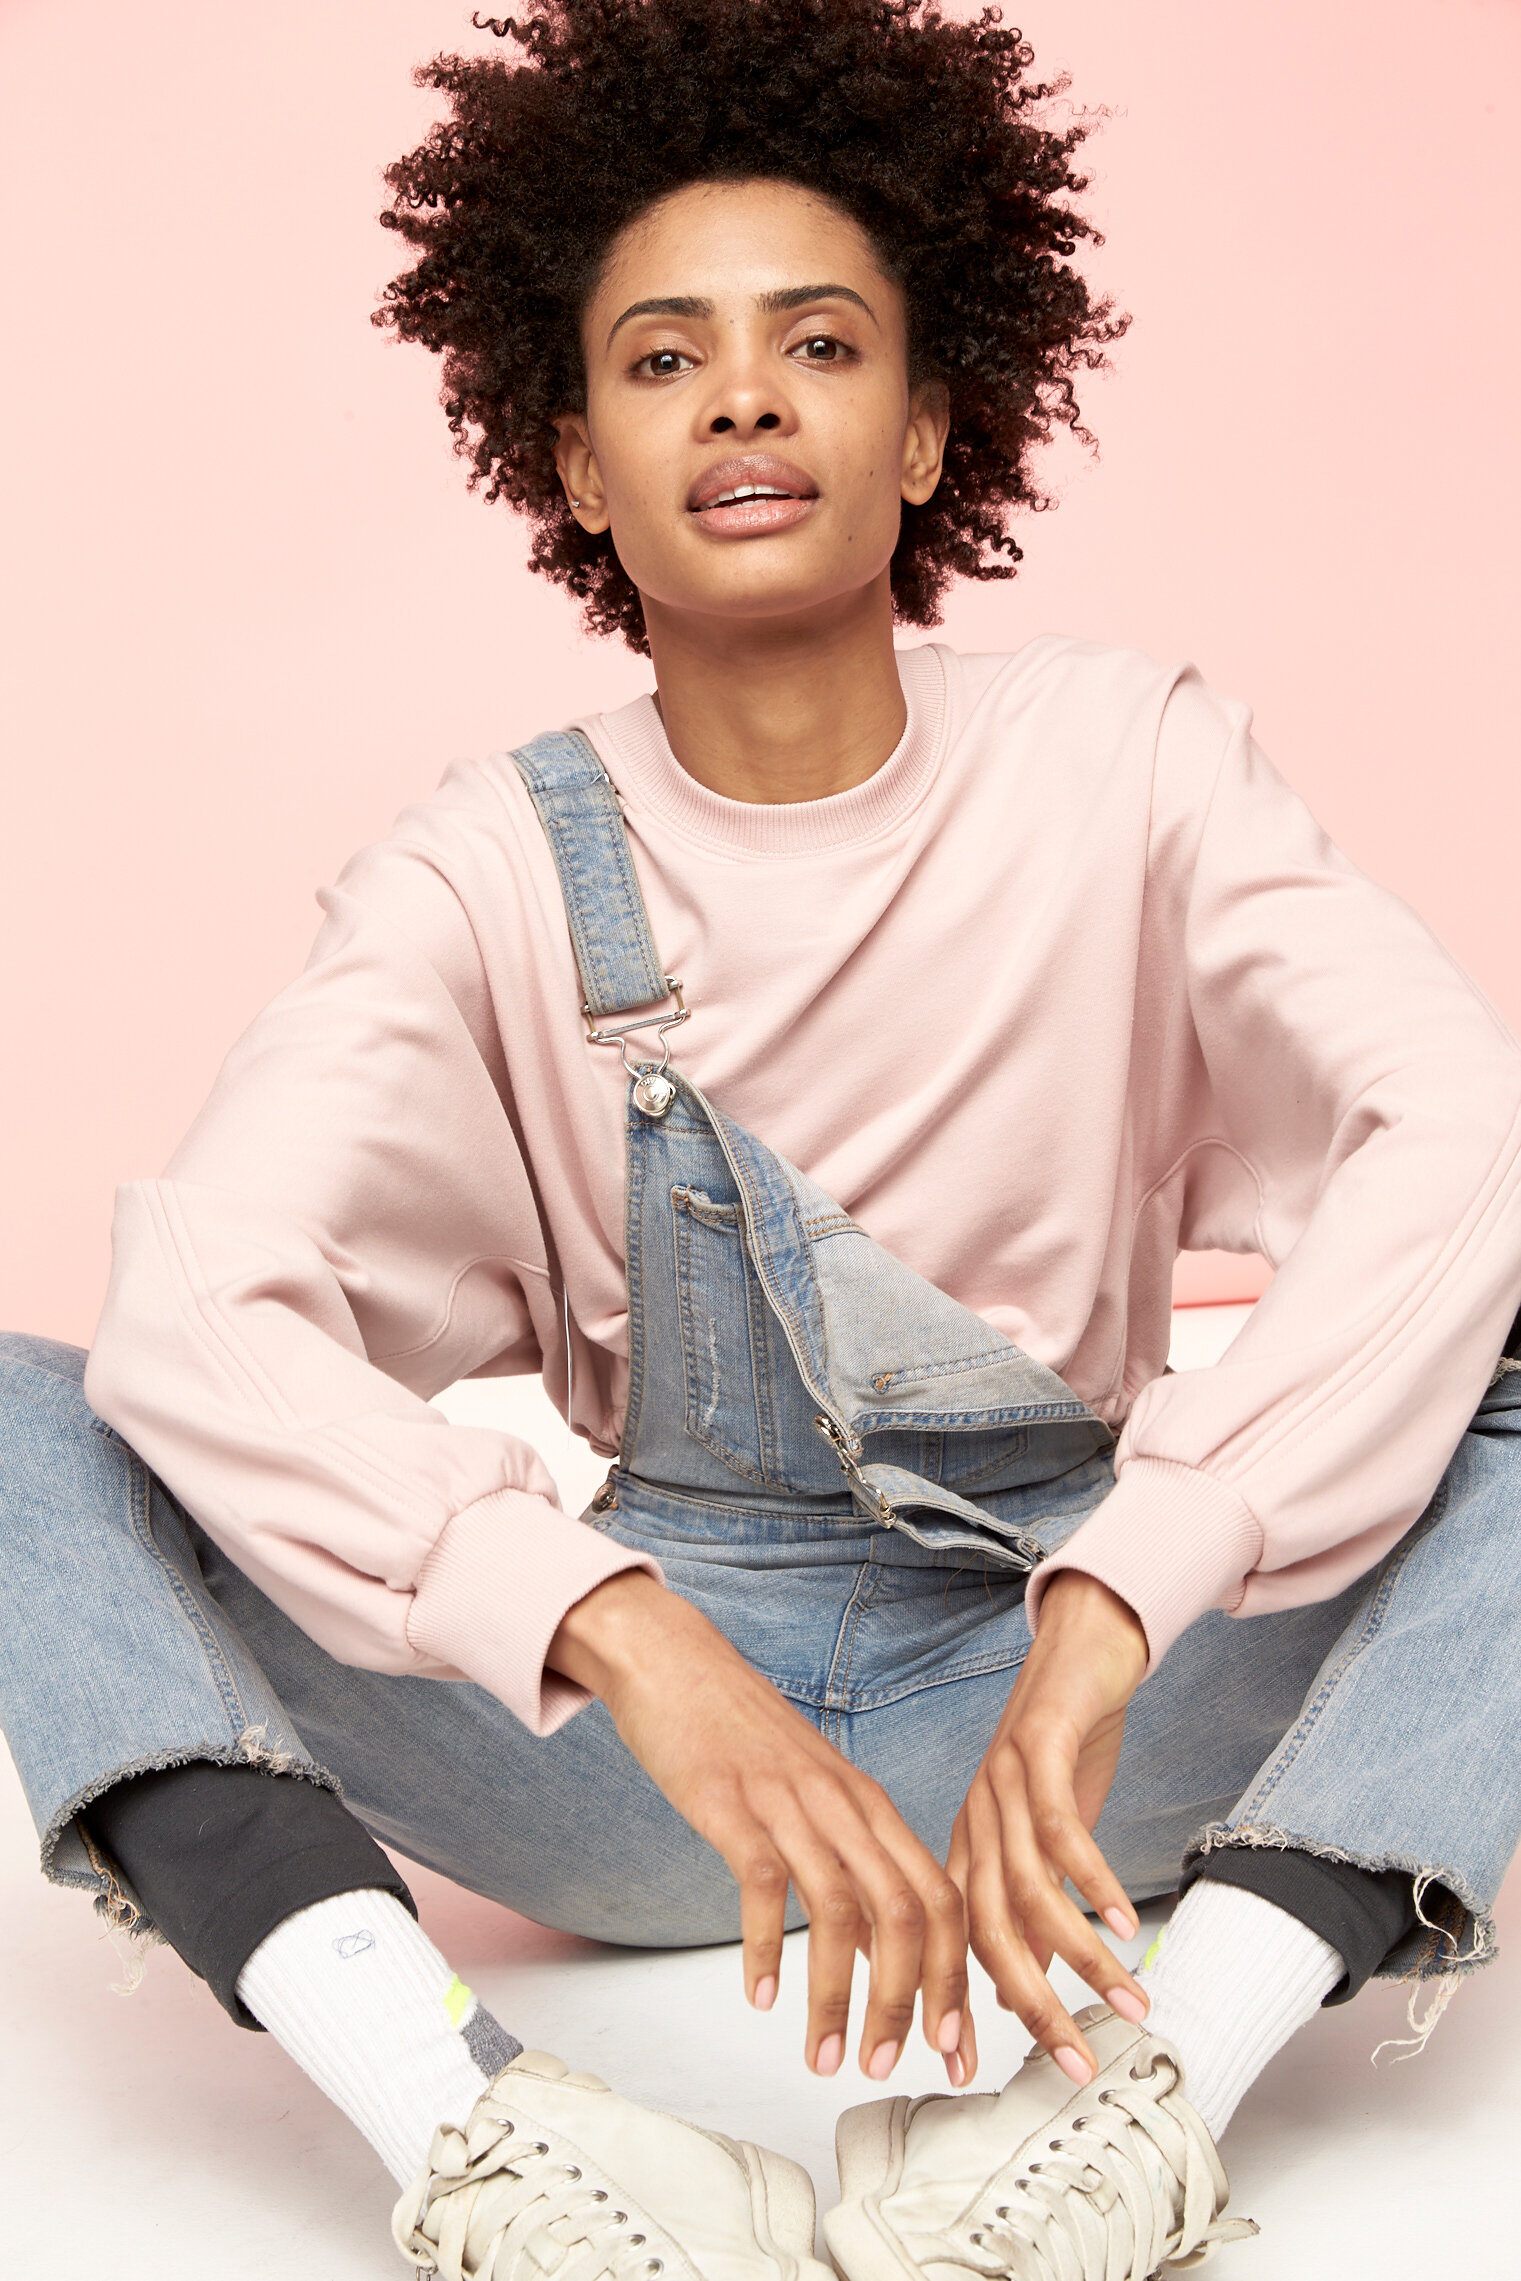   Creative Direction: Coco Tardiff / Client: StriVectin / Video + Post Production: Lushpop Productions. / Photography: Andrew Stinson / Styling: Bre Welch / Makeup: Yacine Diallo / Hair: Michael Johnson / Produced by: Candace Allenson  